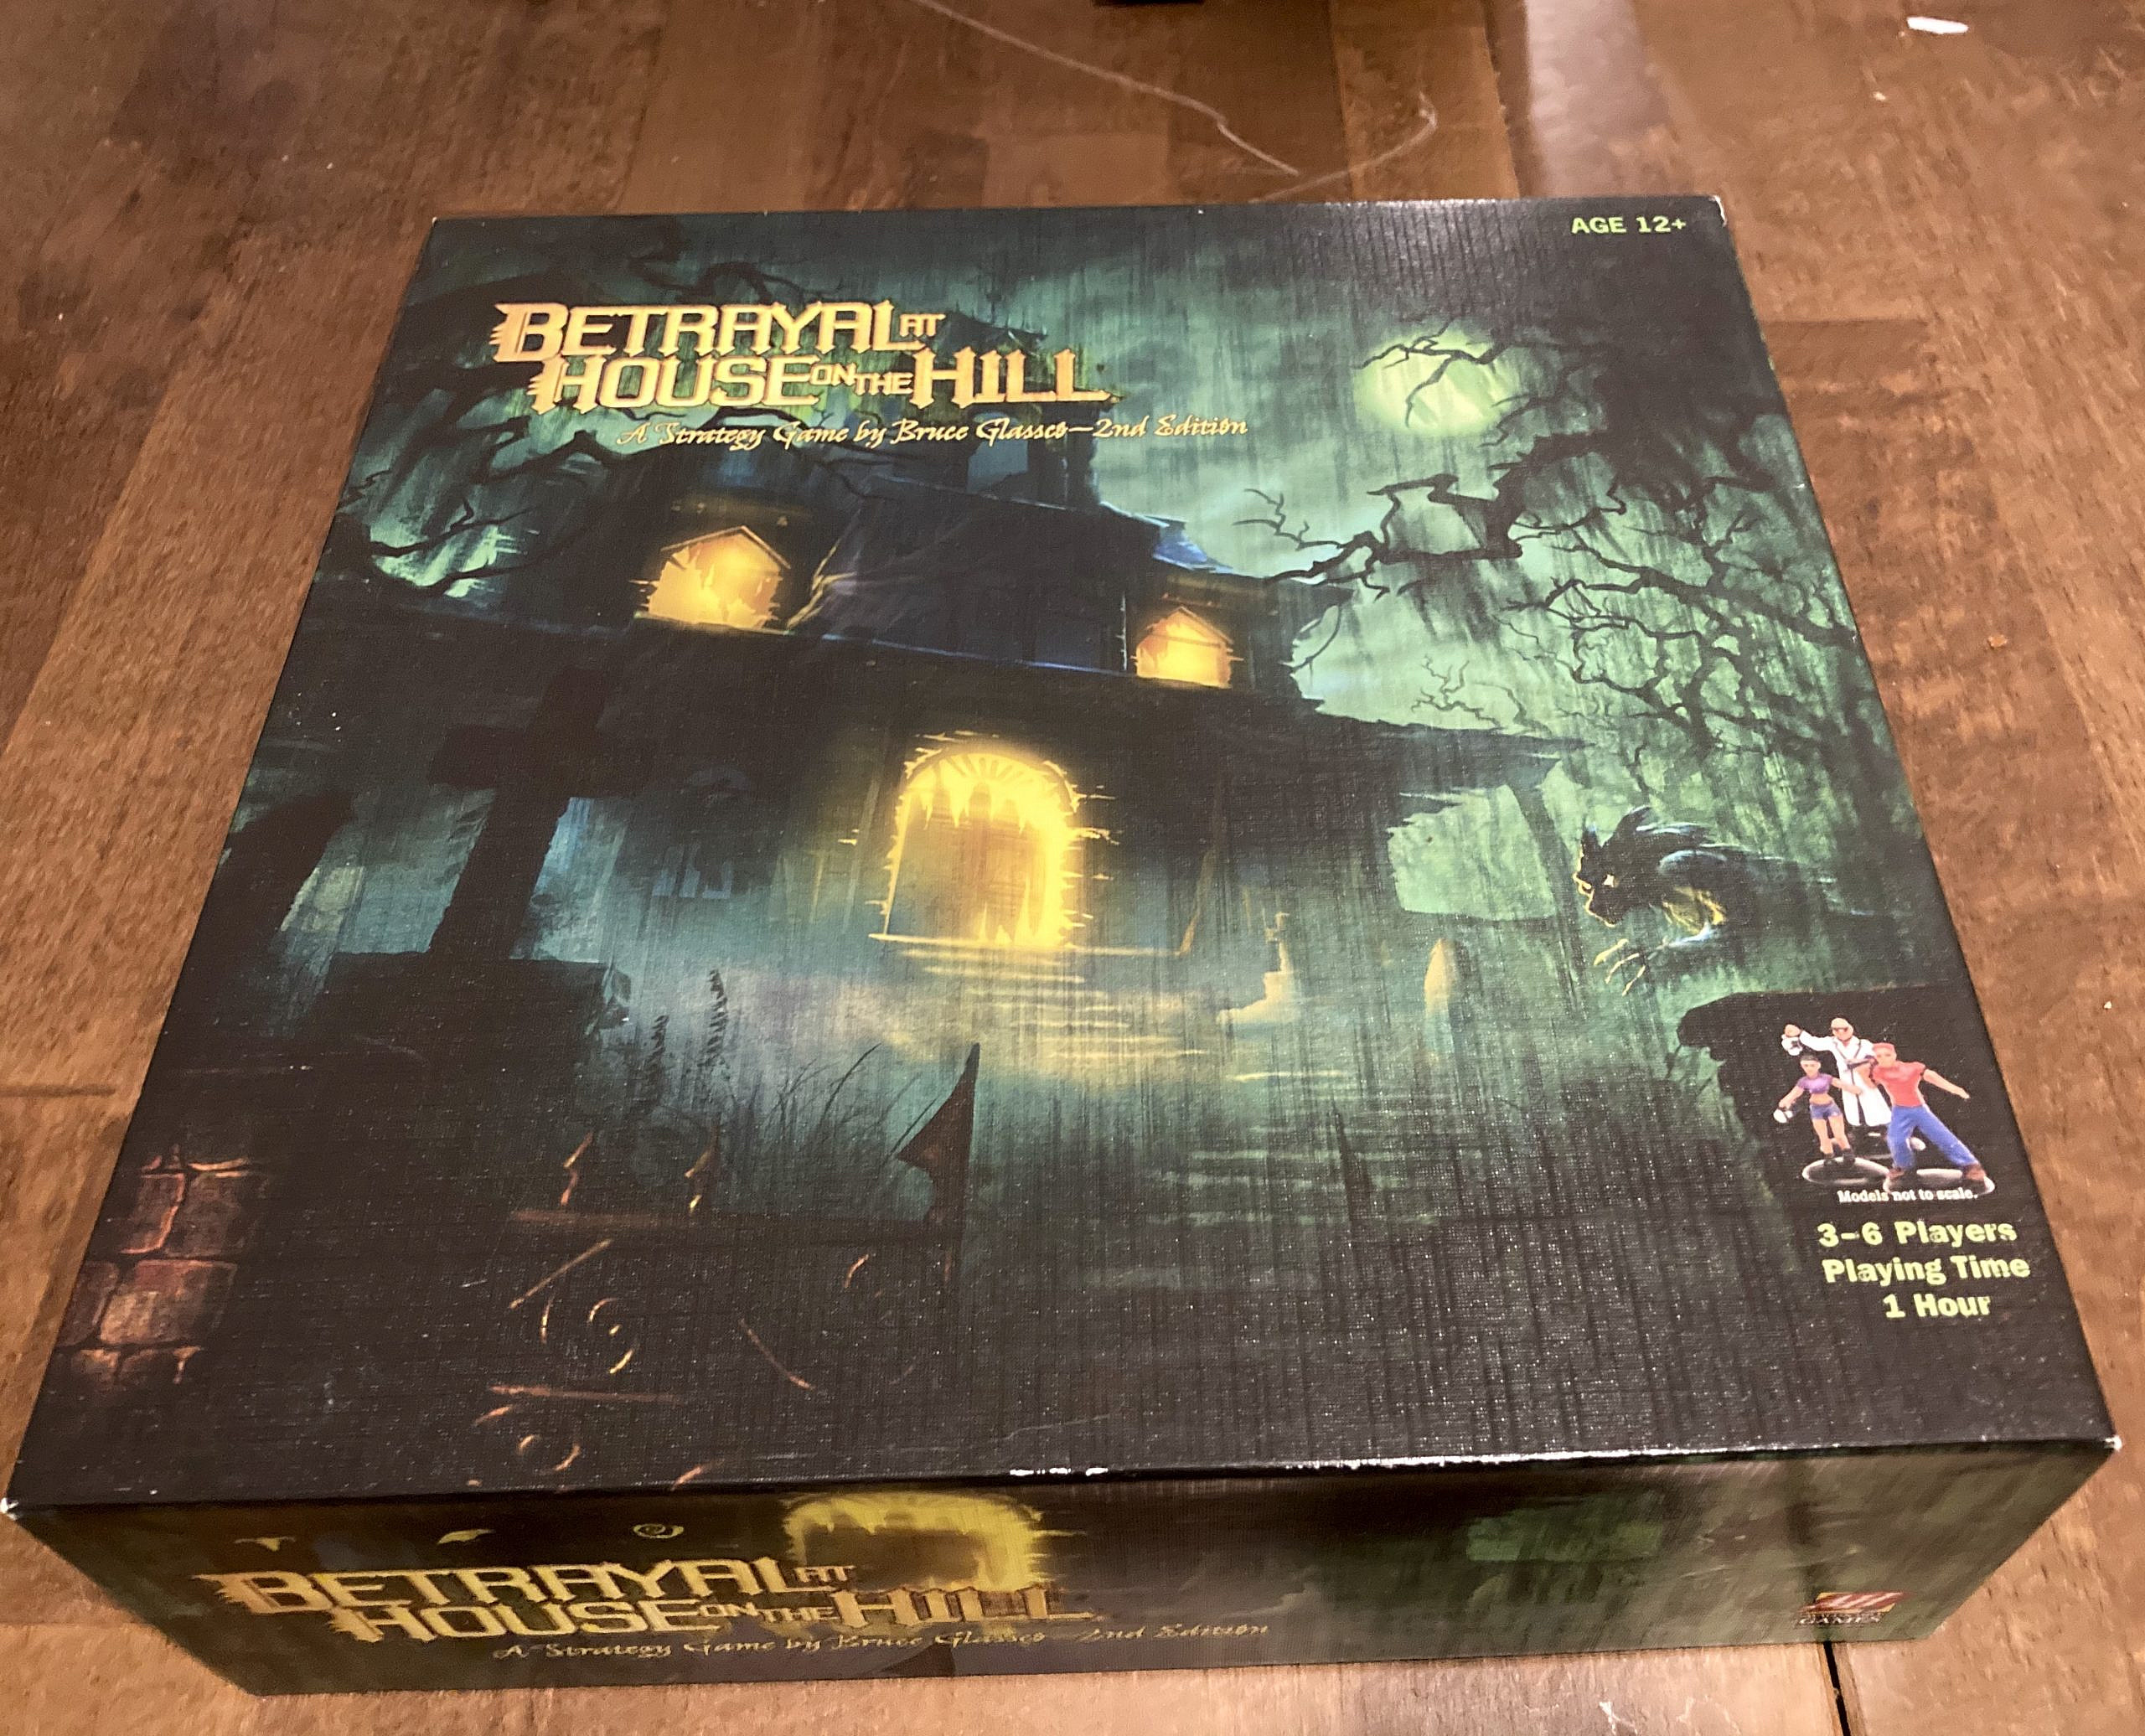 The game's box that features an illustration of a haunted house.